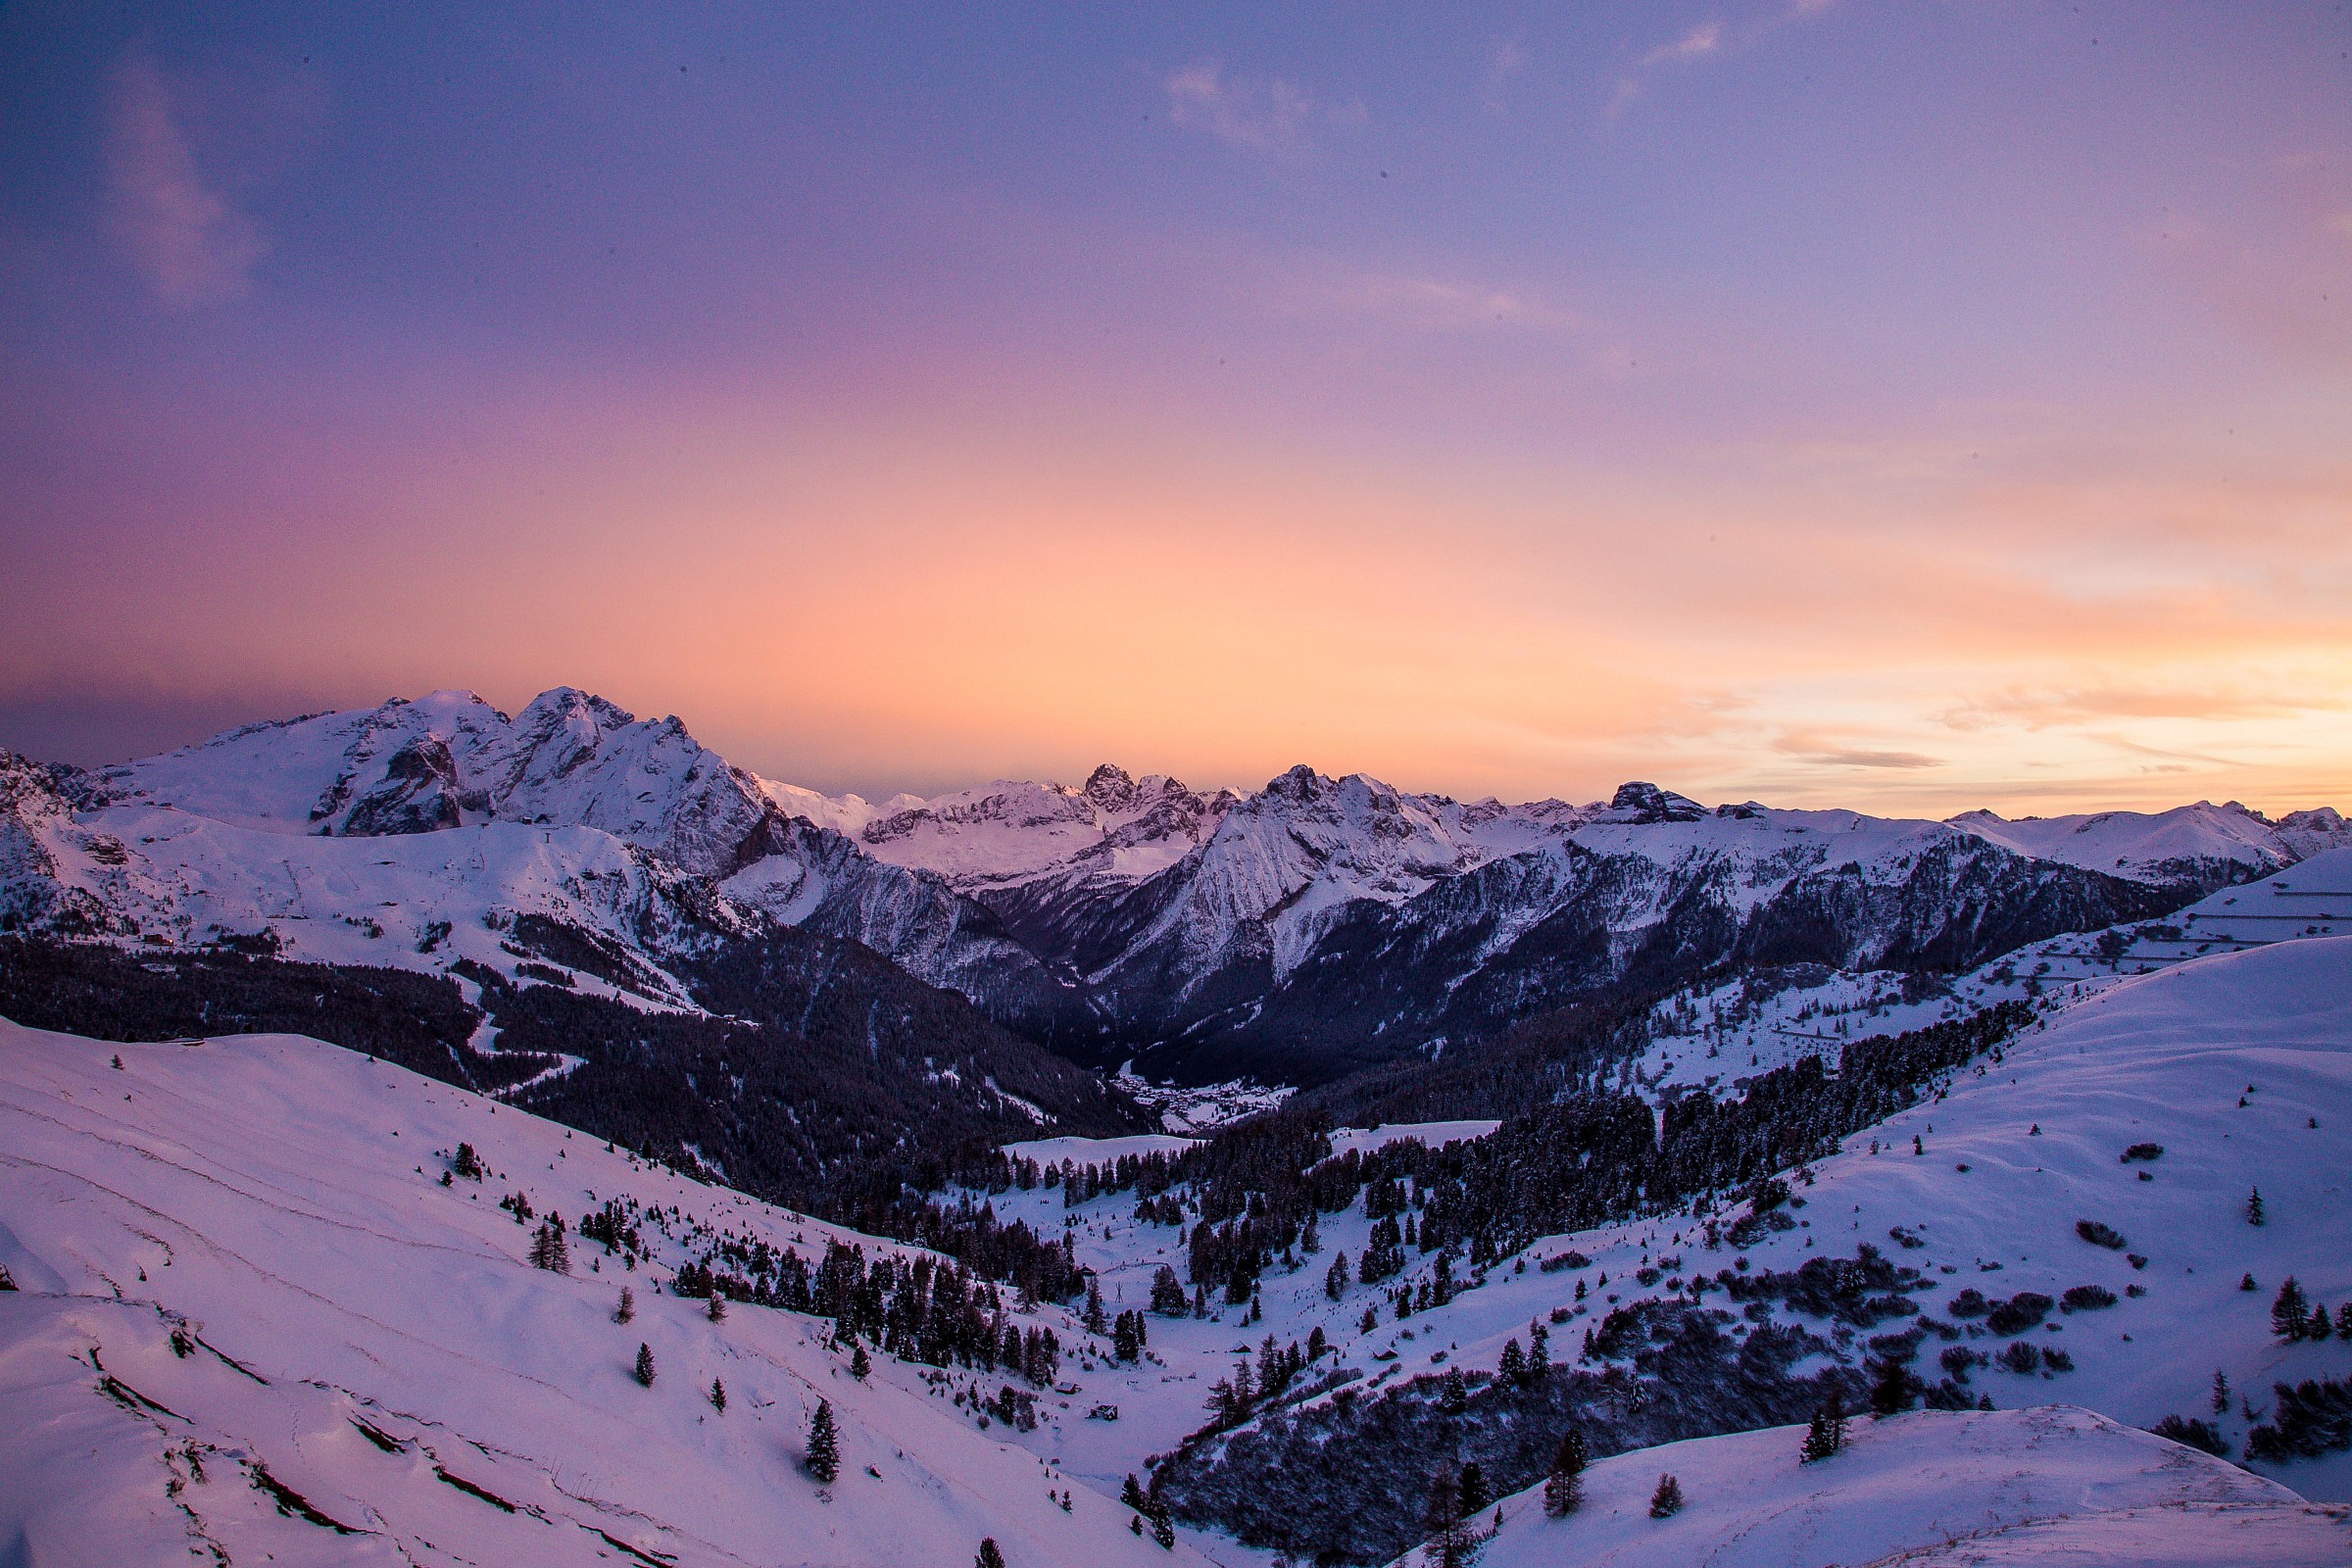 Sunset on the Val di Fassa...